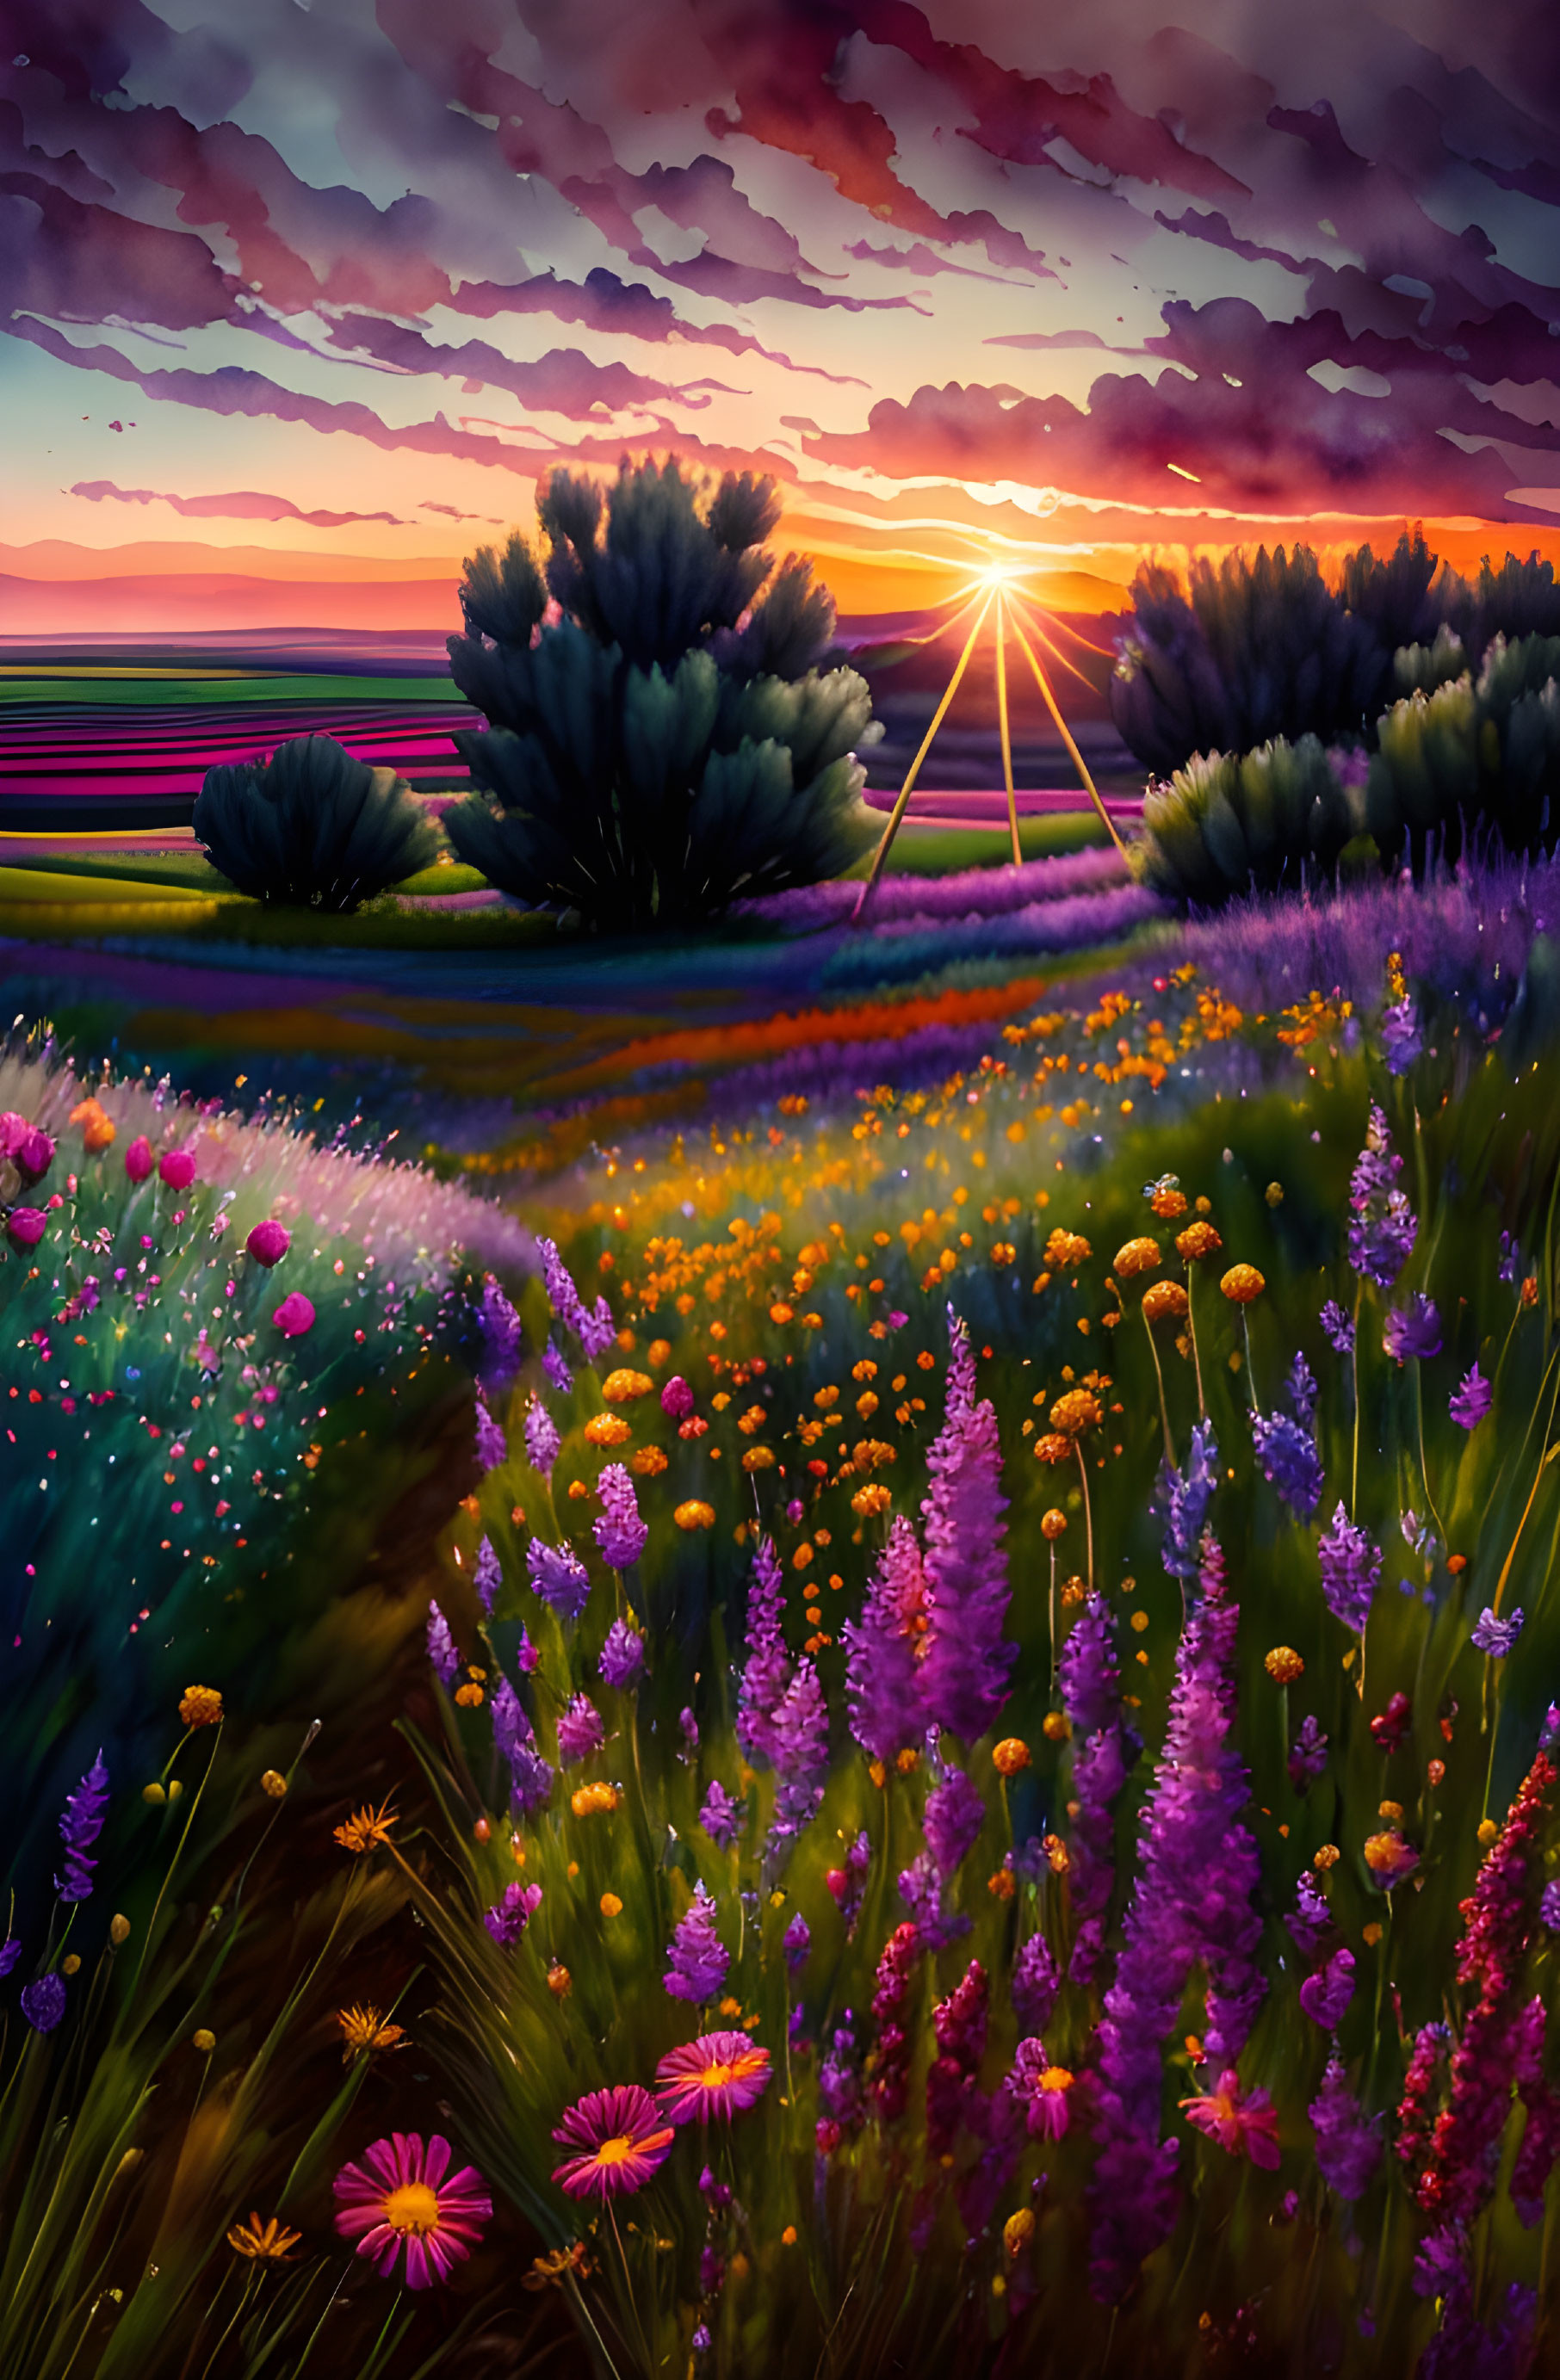 Colorful blooming flowers in layered fields under a dramatic sunset sky